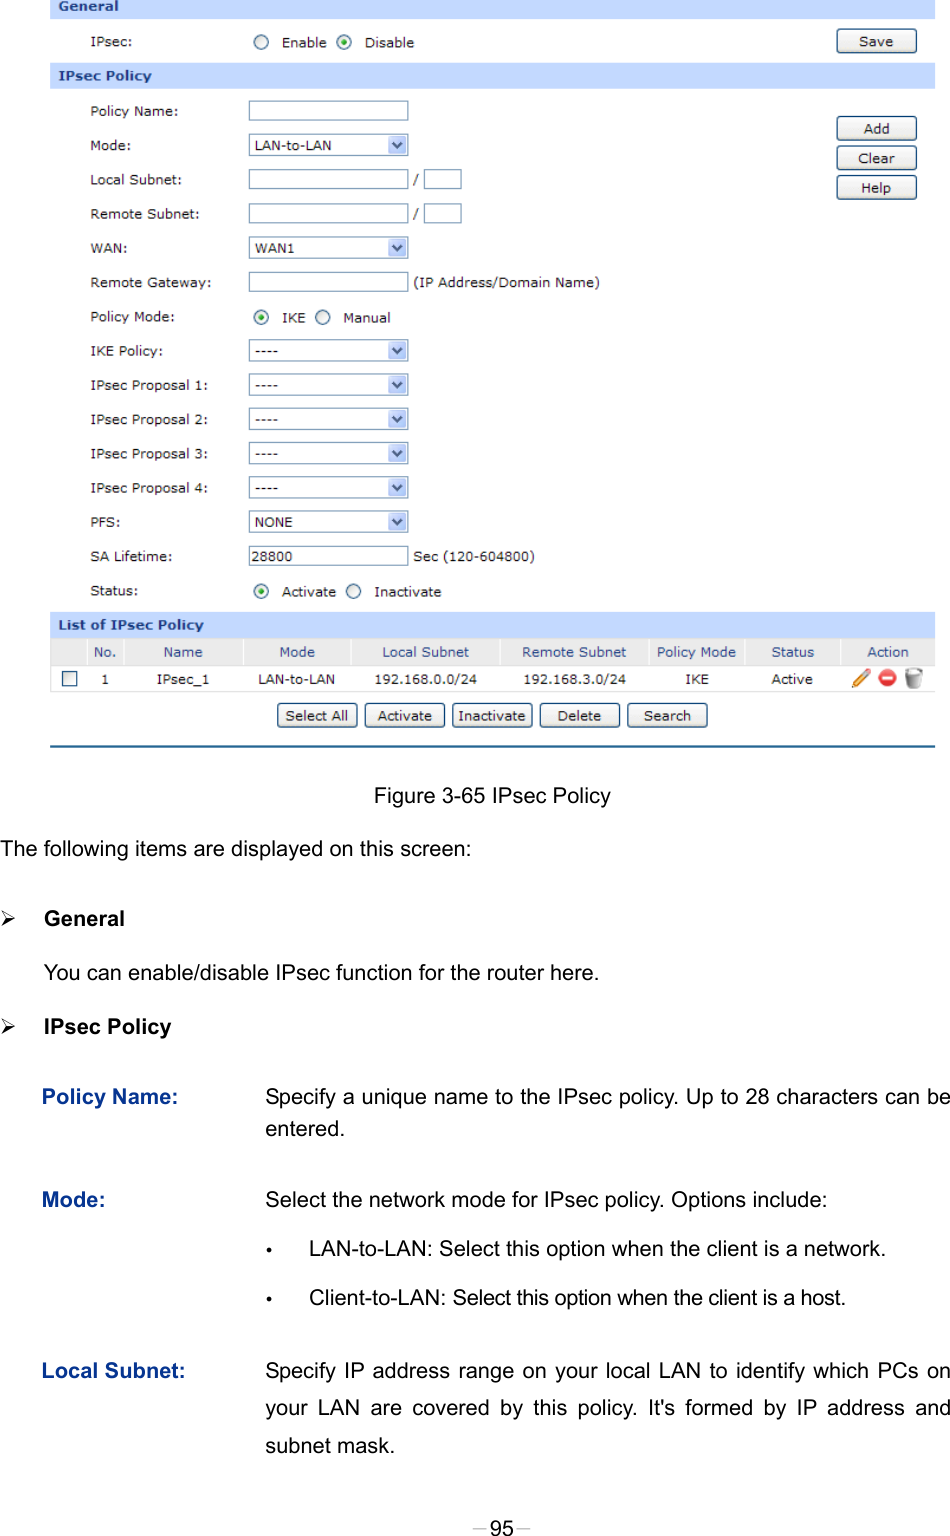   Figure 3-65 IPsec Policy The following items are displayed on this screen:  General You can enable/disable IPsec function for the router here.    IPsec Policy   Policy Name: Specify a unique name to the IPsec policy. Up to 28 characters can be entered.   Mode: Select the network mode for IPsec policy. Options include:  LAN-to-LAN: Select this option when the client is a network.  Client-to-LAN: Select this option when the client is a host. Local Subnet: Specify IP address range on your local LAN to identify which PCs on your LAN are covered by this policy. It&apos;s formed by IP address and subnet mask.   -95- 